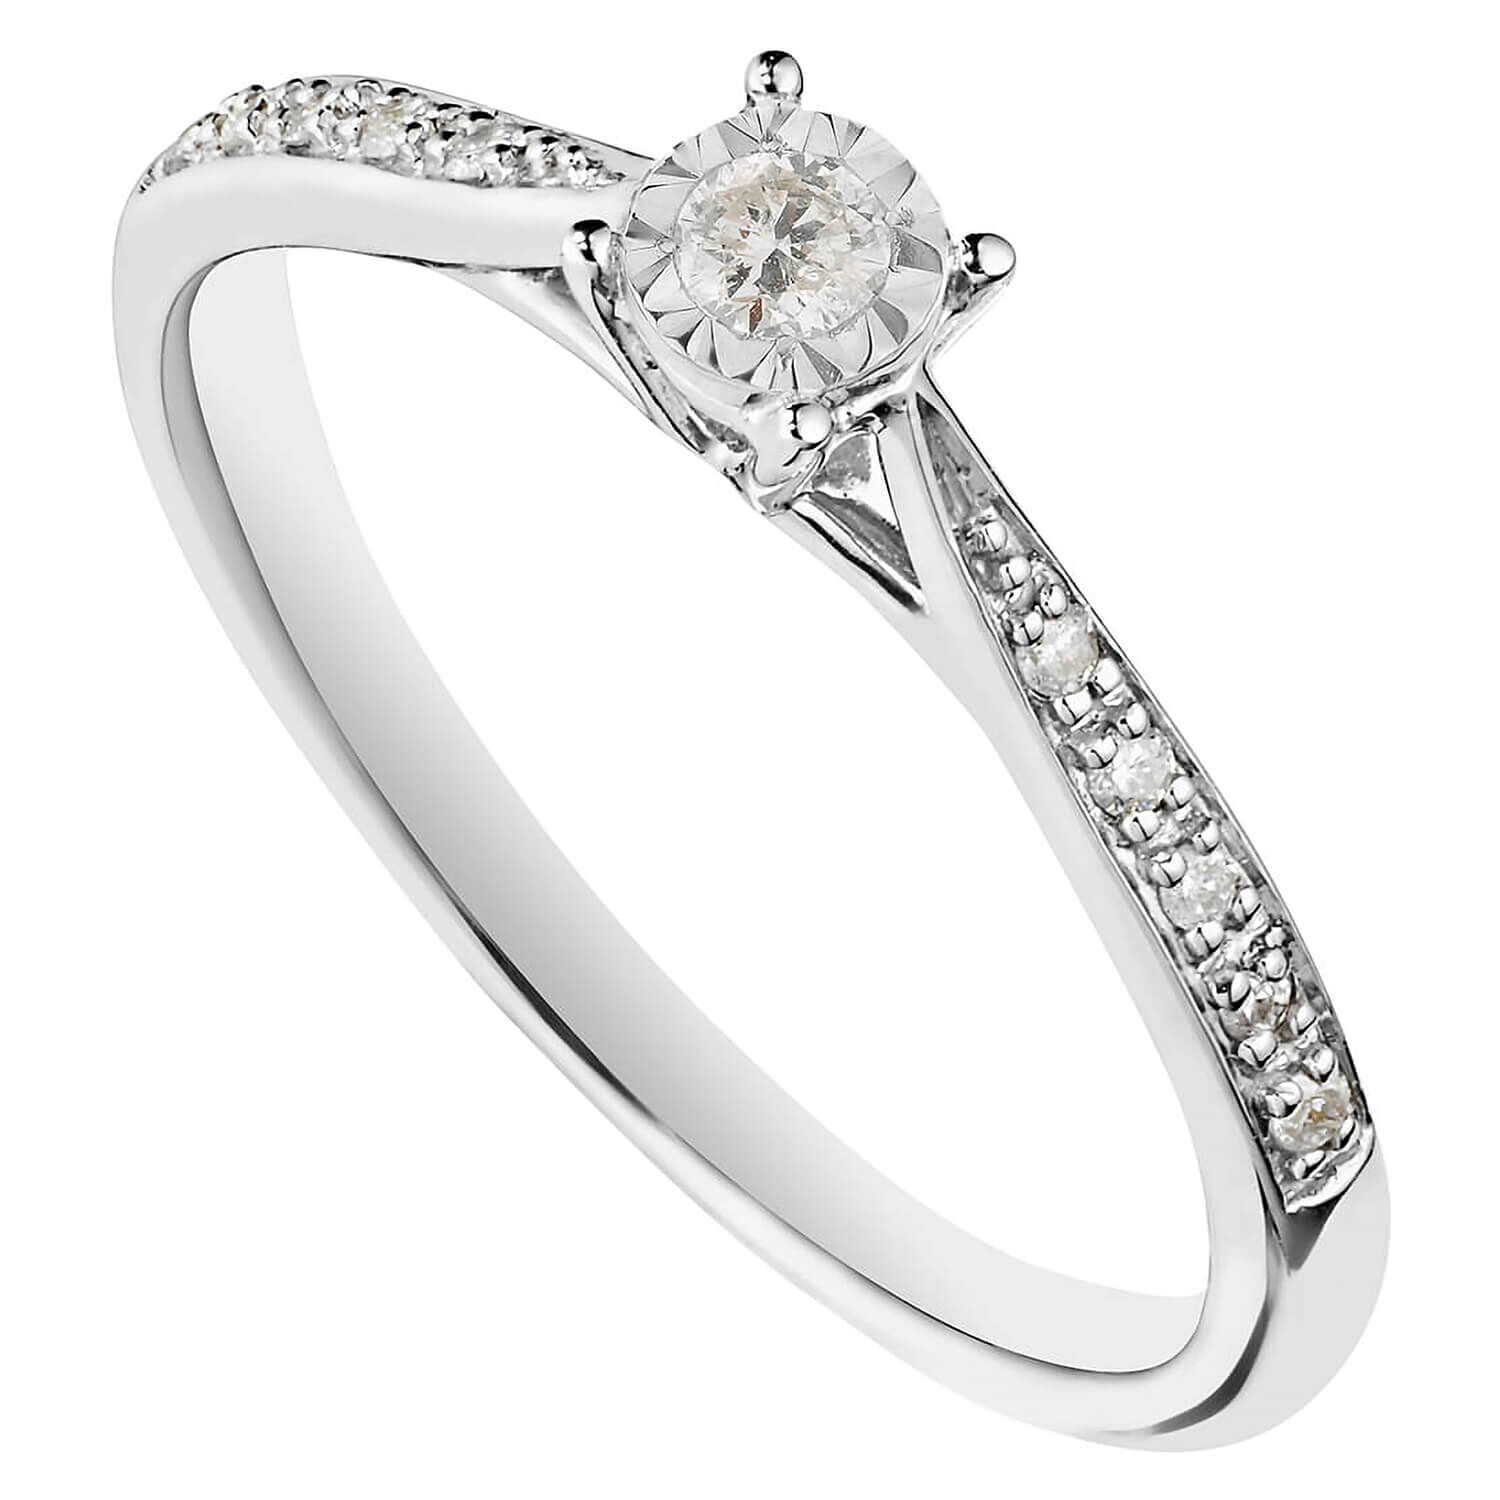 Best Black Friday Wedding Rings & Engagement Rings 2020 - hitched.co.uk